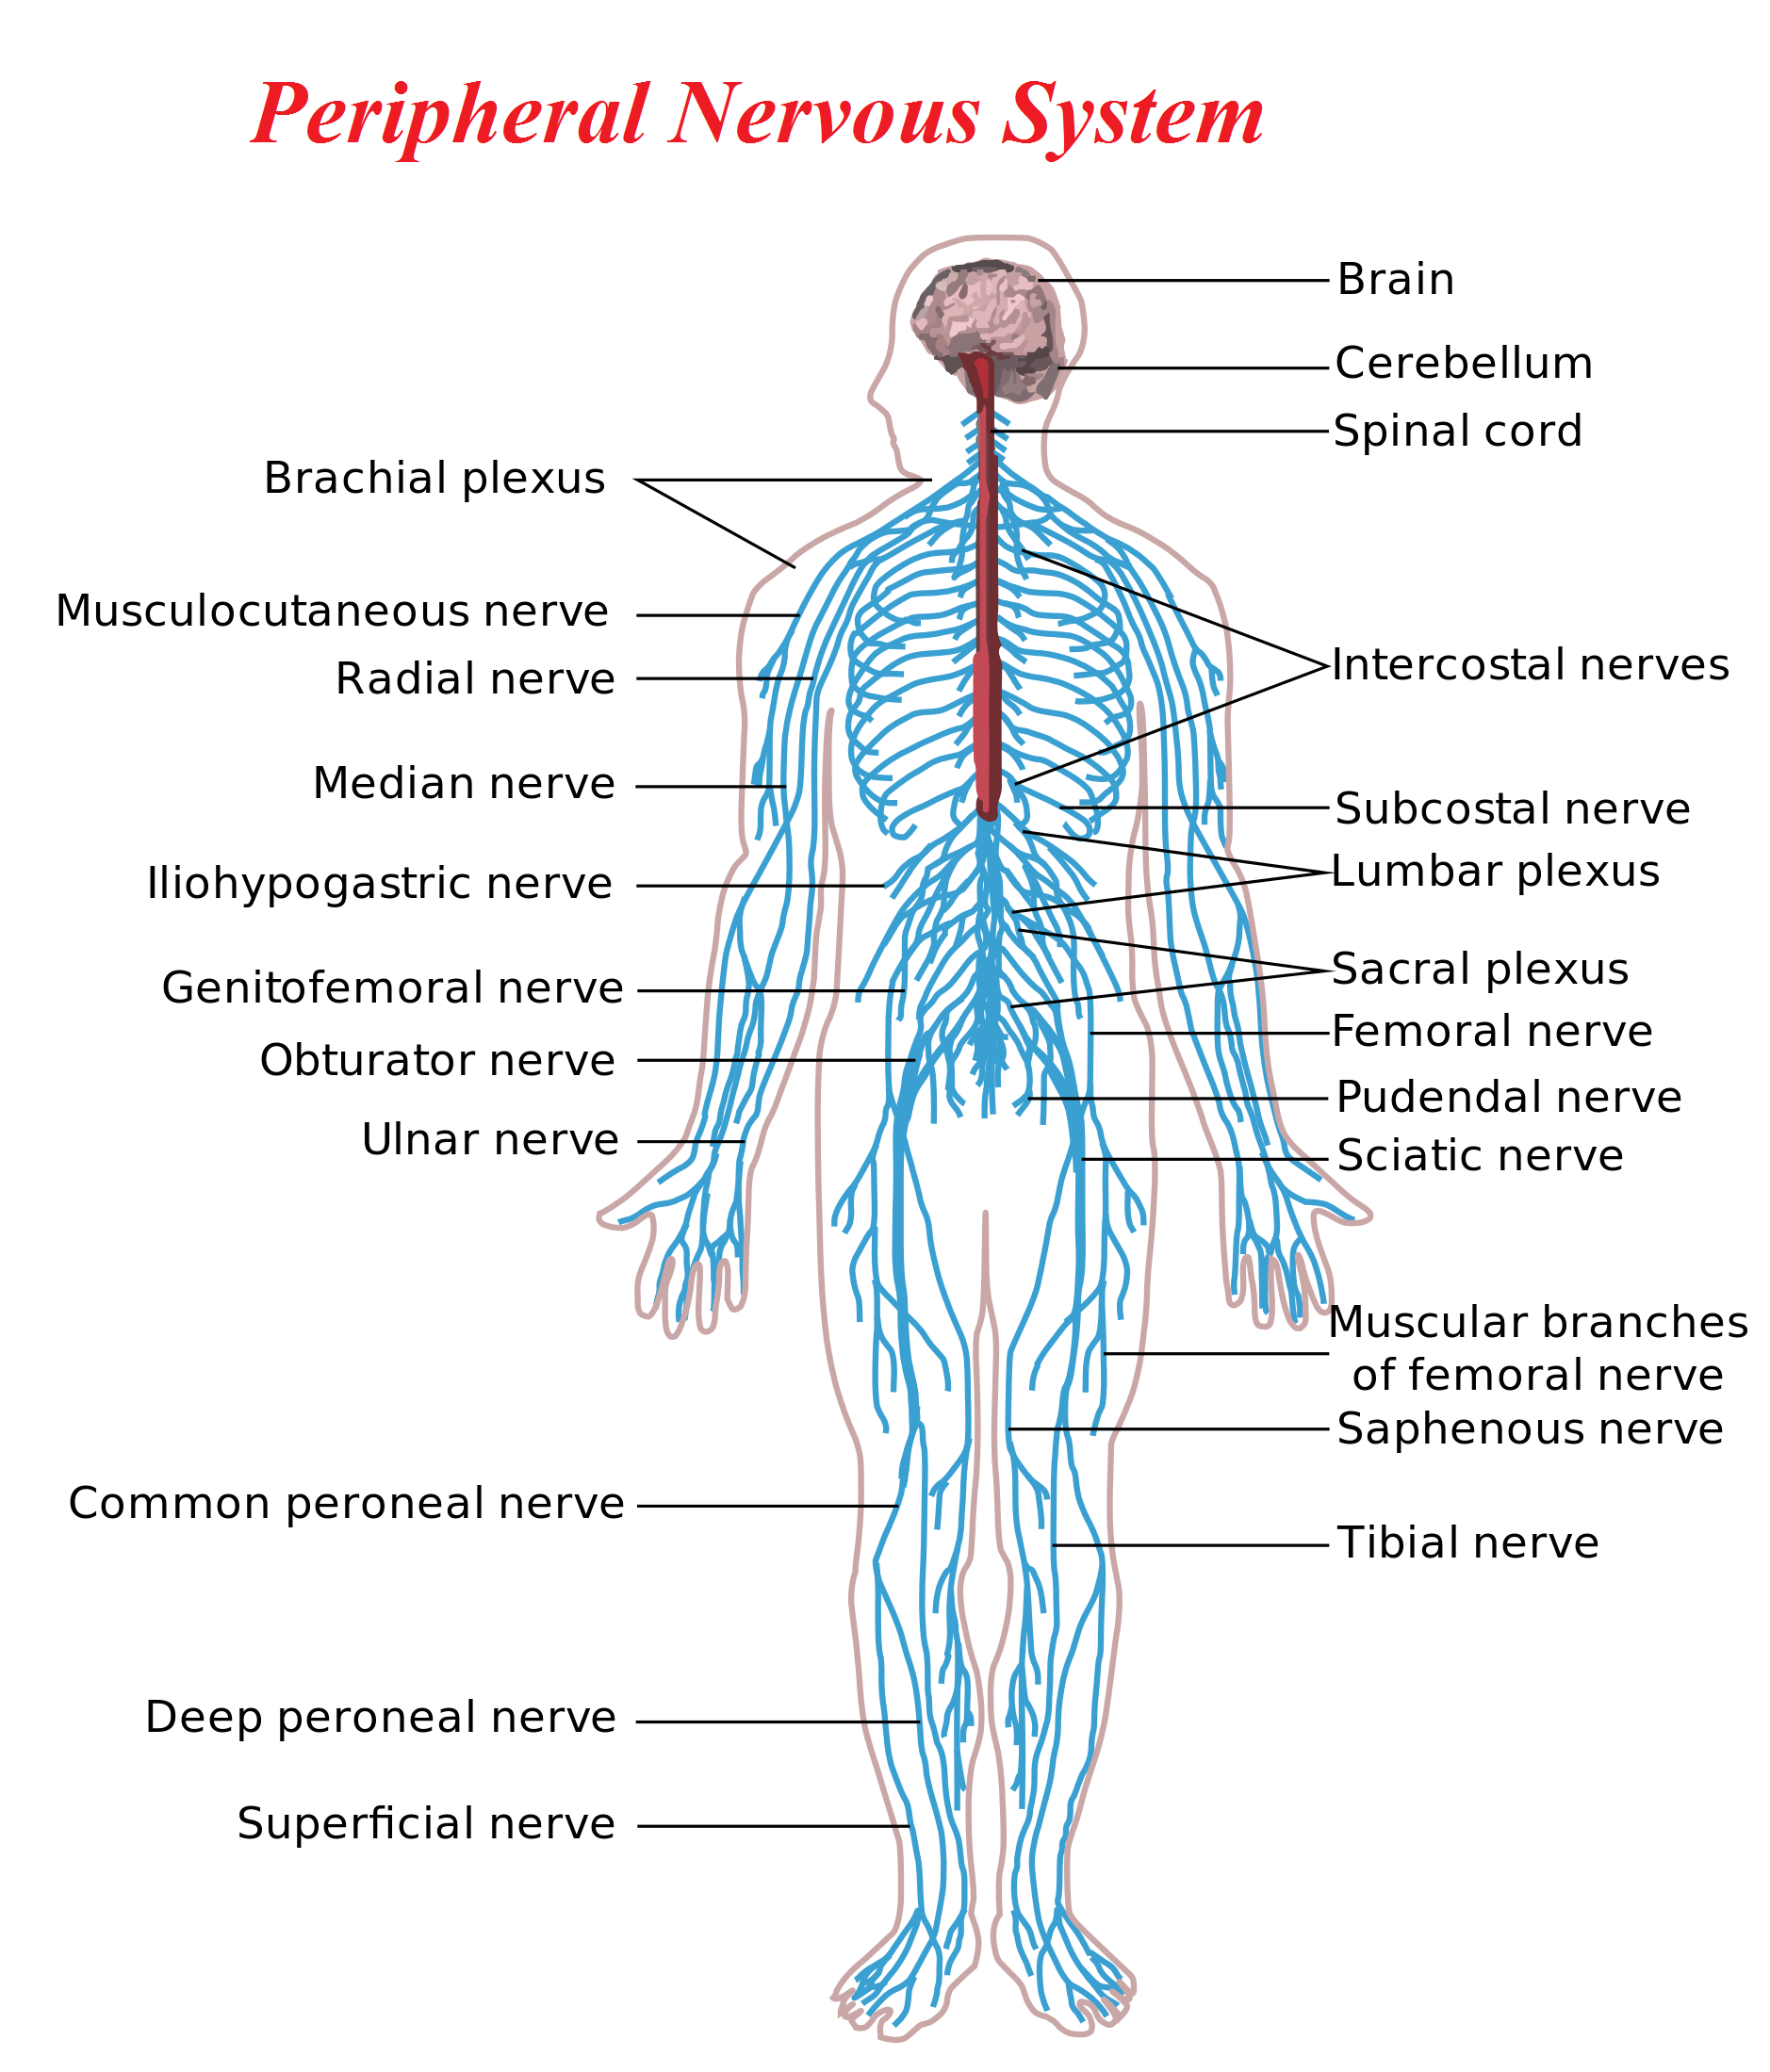 Job of the peripheral nervous system